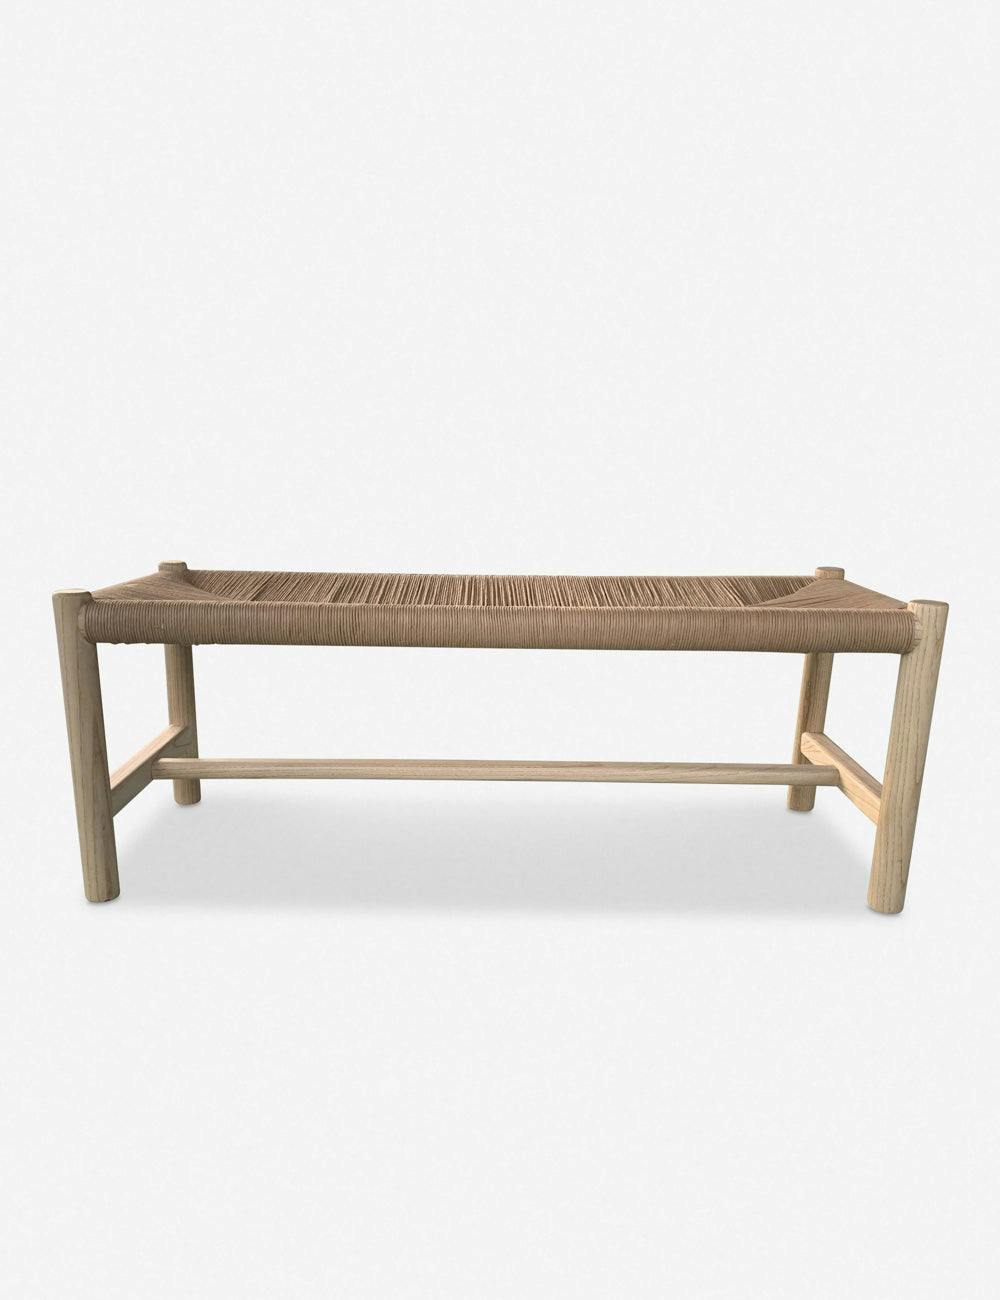 Hawthorn Natural Elm Wood Bench with Woven Fiber Rope Seat - 60"W